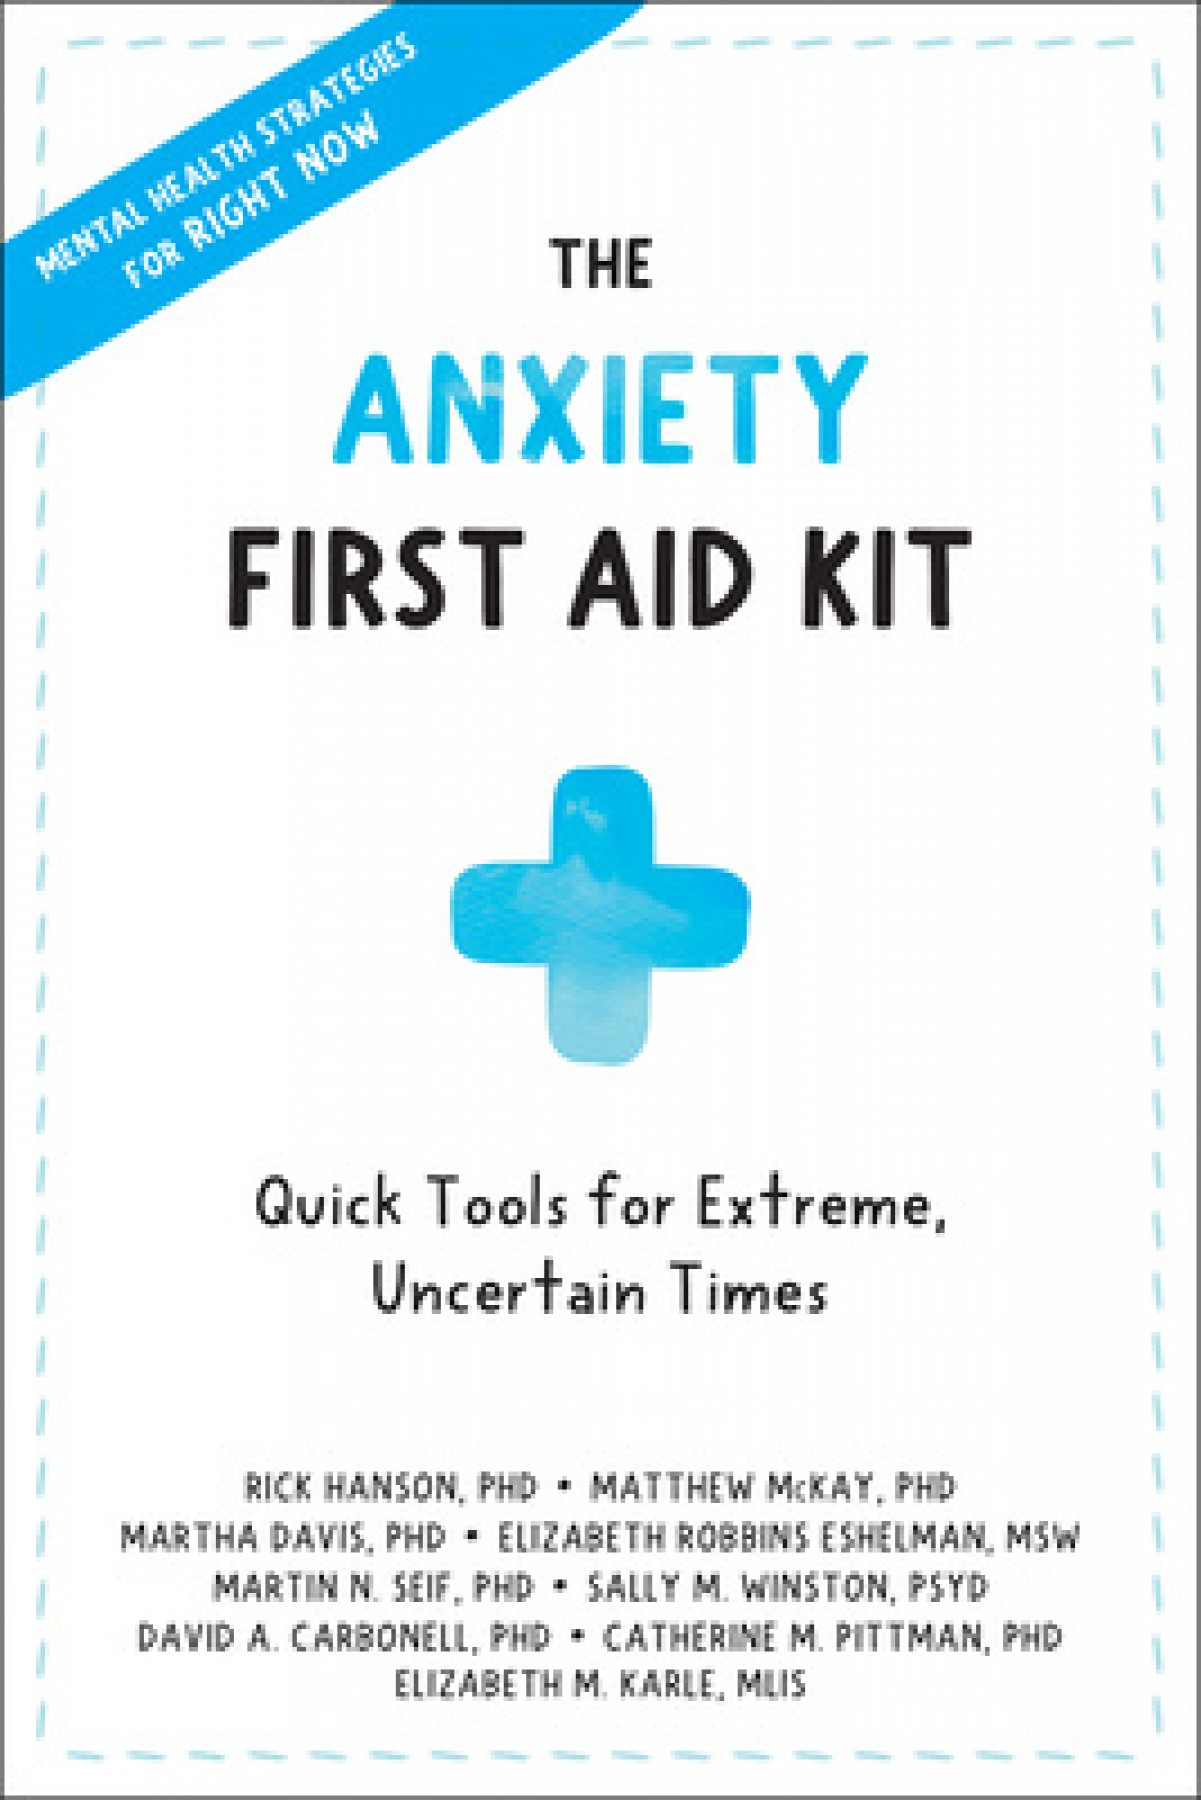 The anxiety first aid kit: Quick tools for extreme, uncertain times